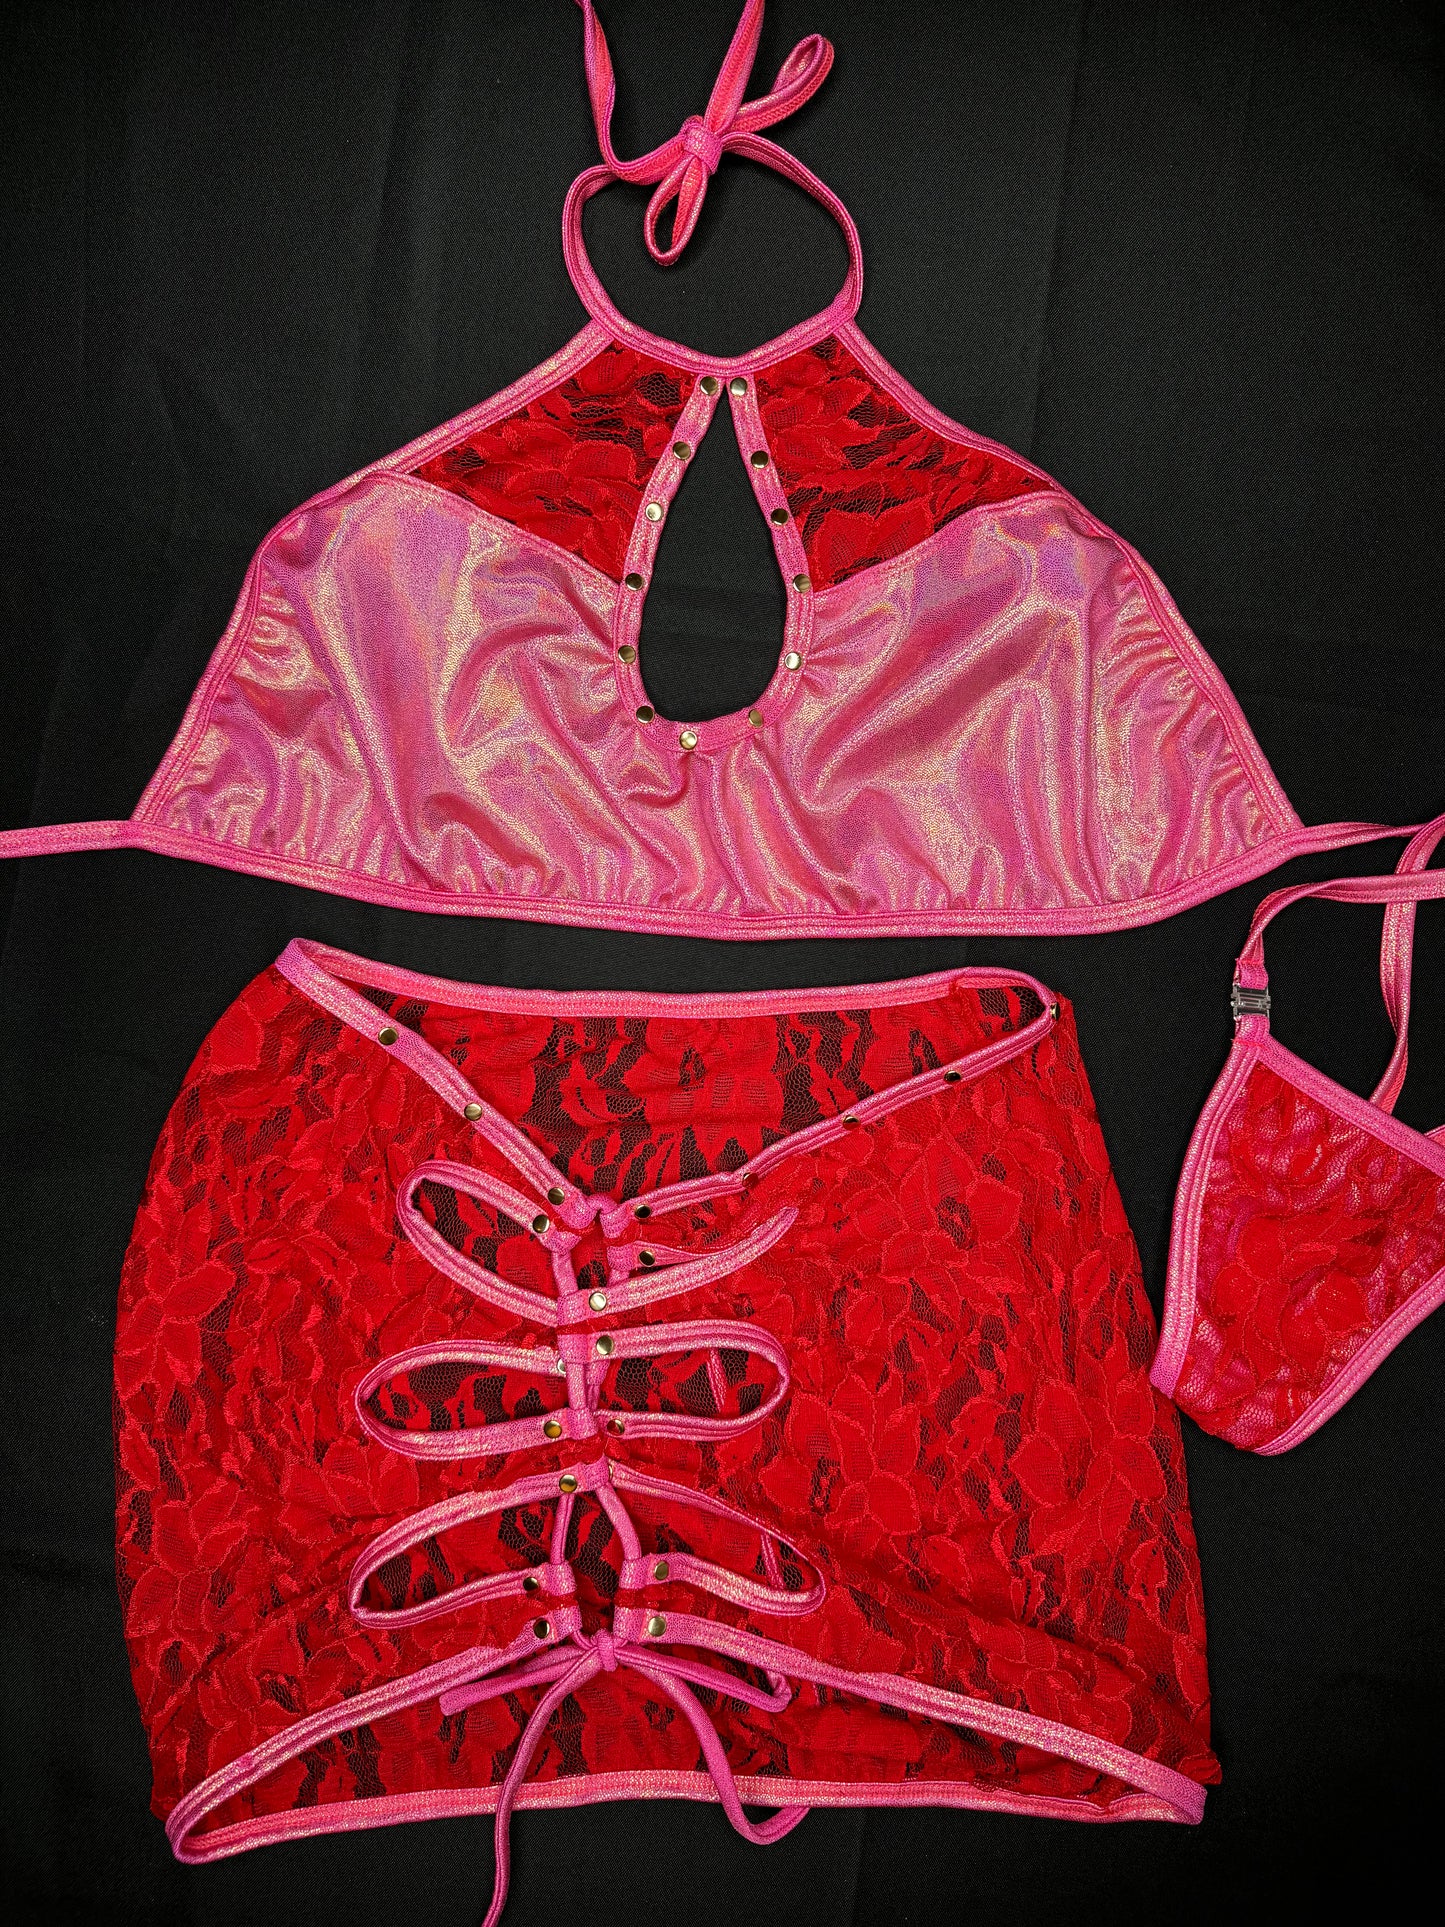 Red Lace/Metallic Hot Pink Three-Piece Lingerie Outfit